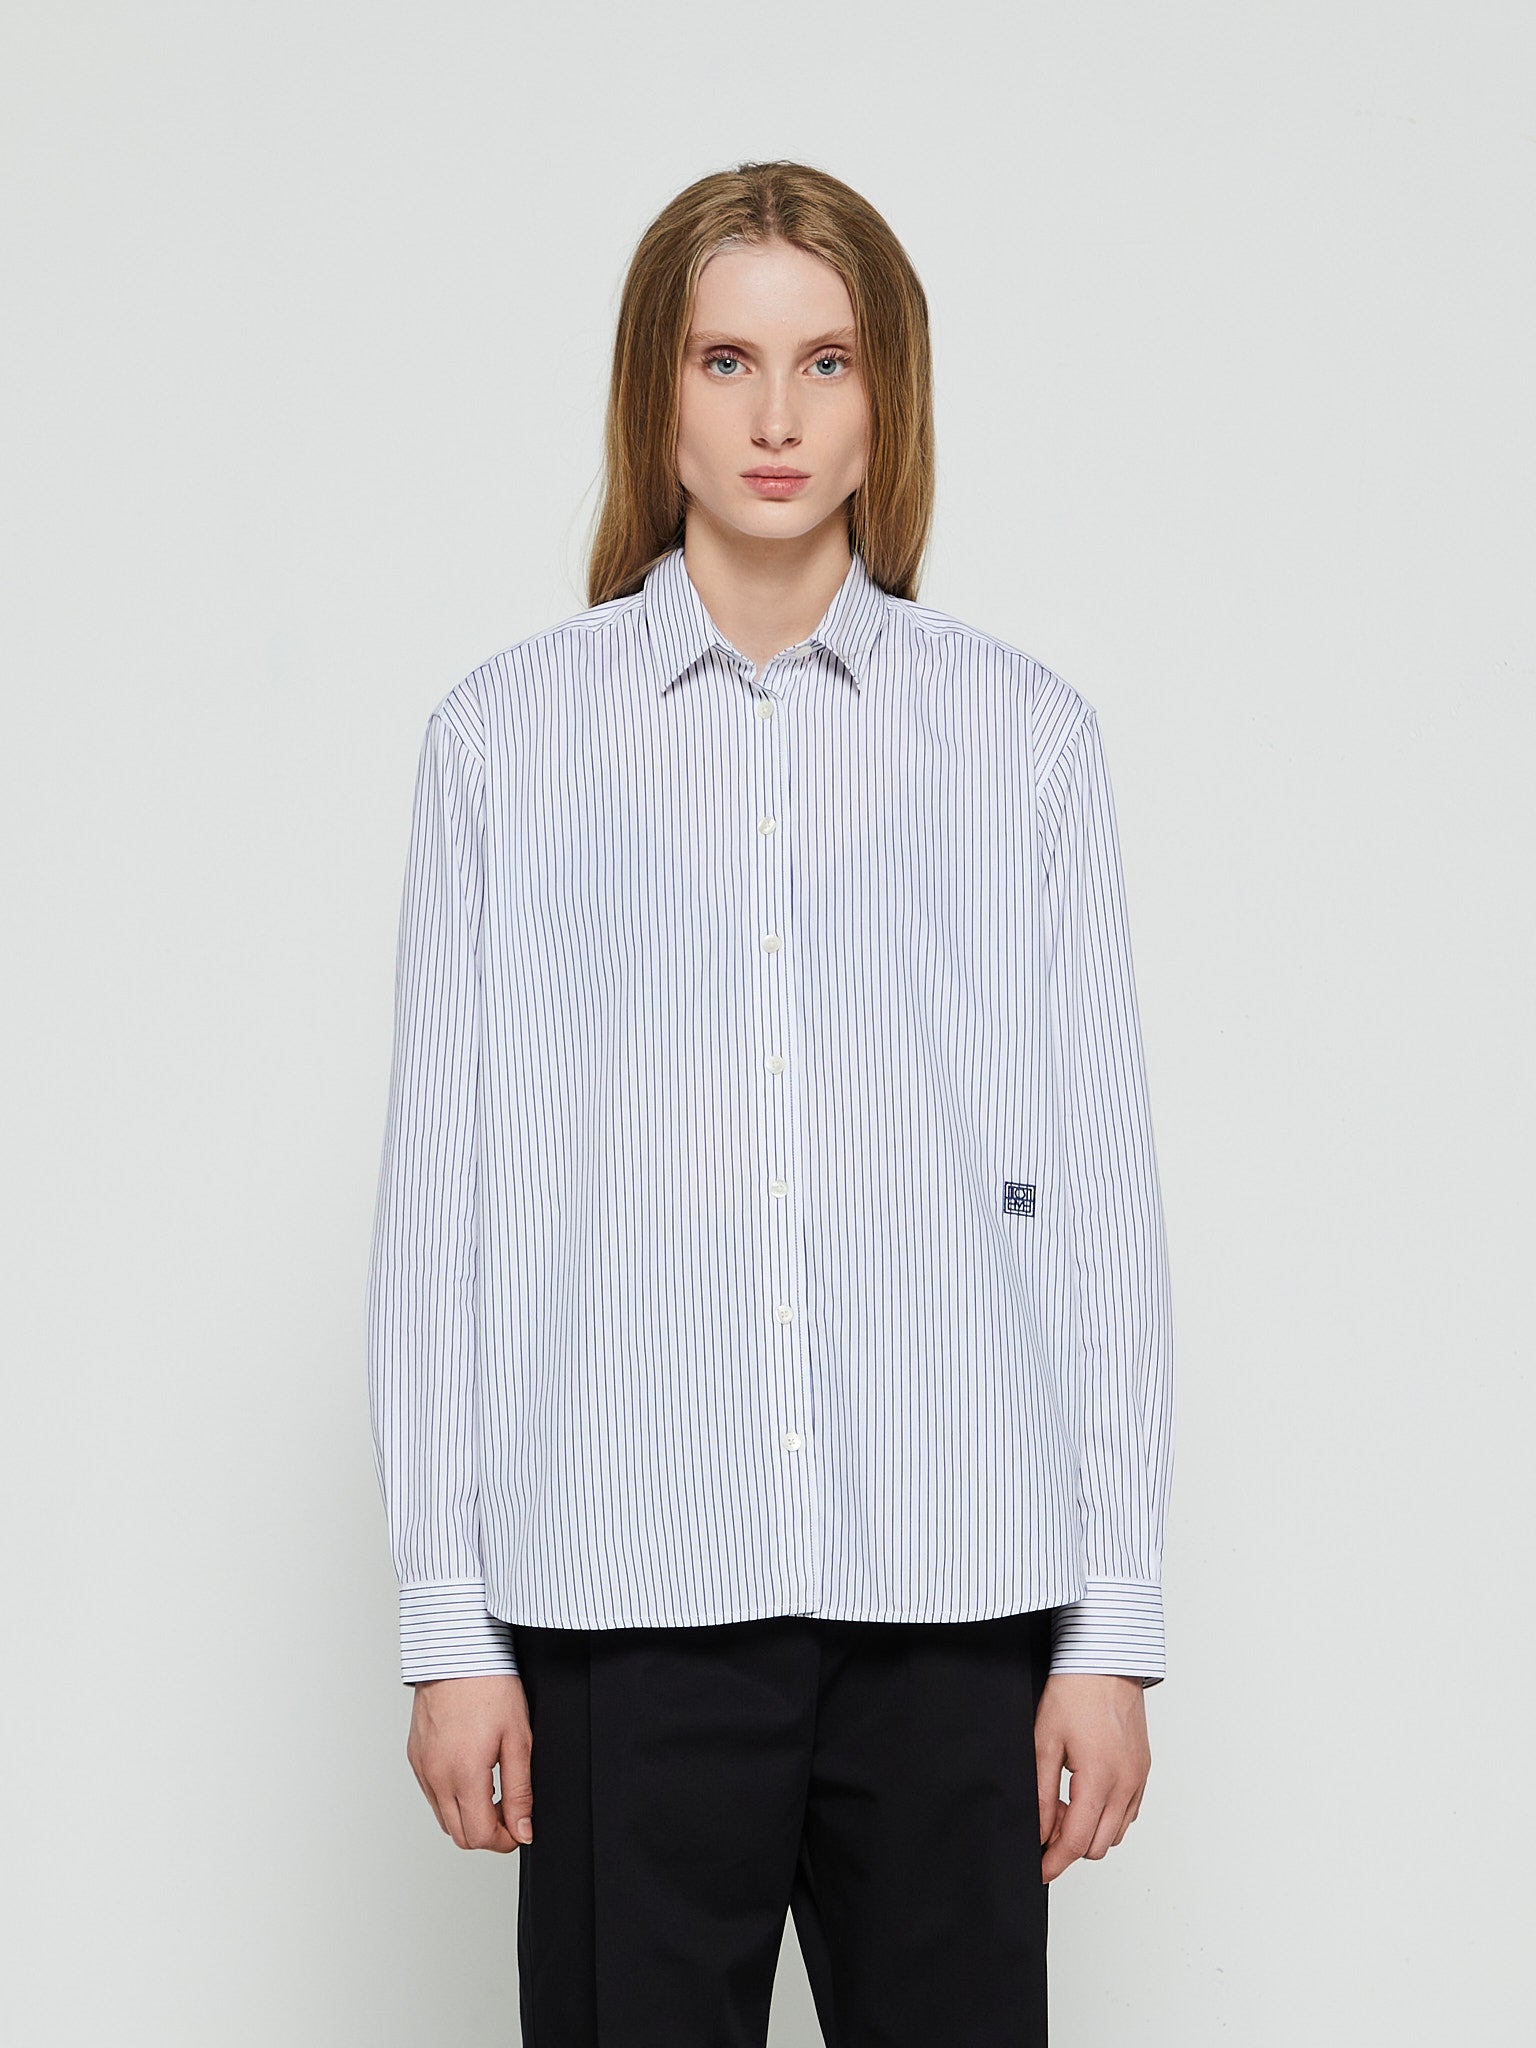 TOTEME - Signature Cotton Shirt in Navy Pinstripe